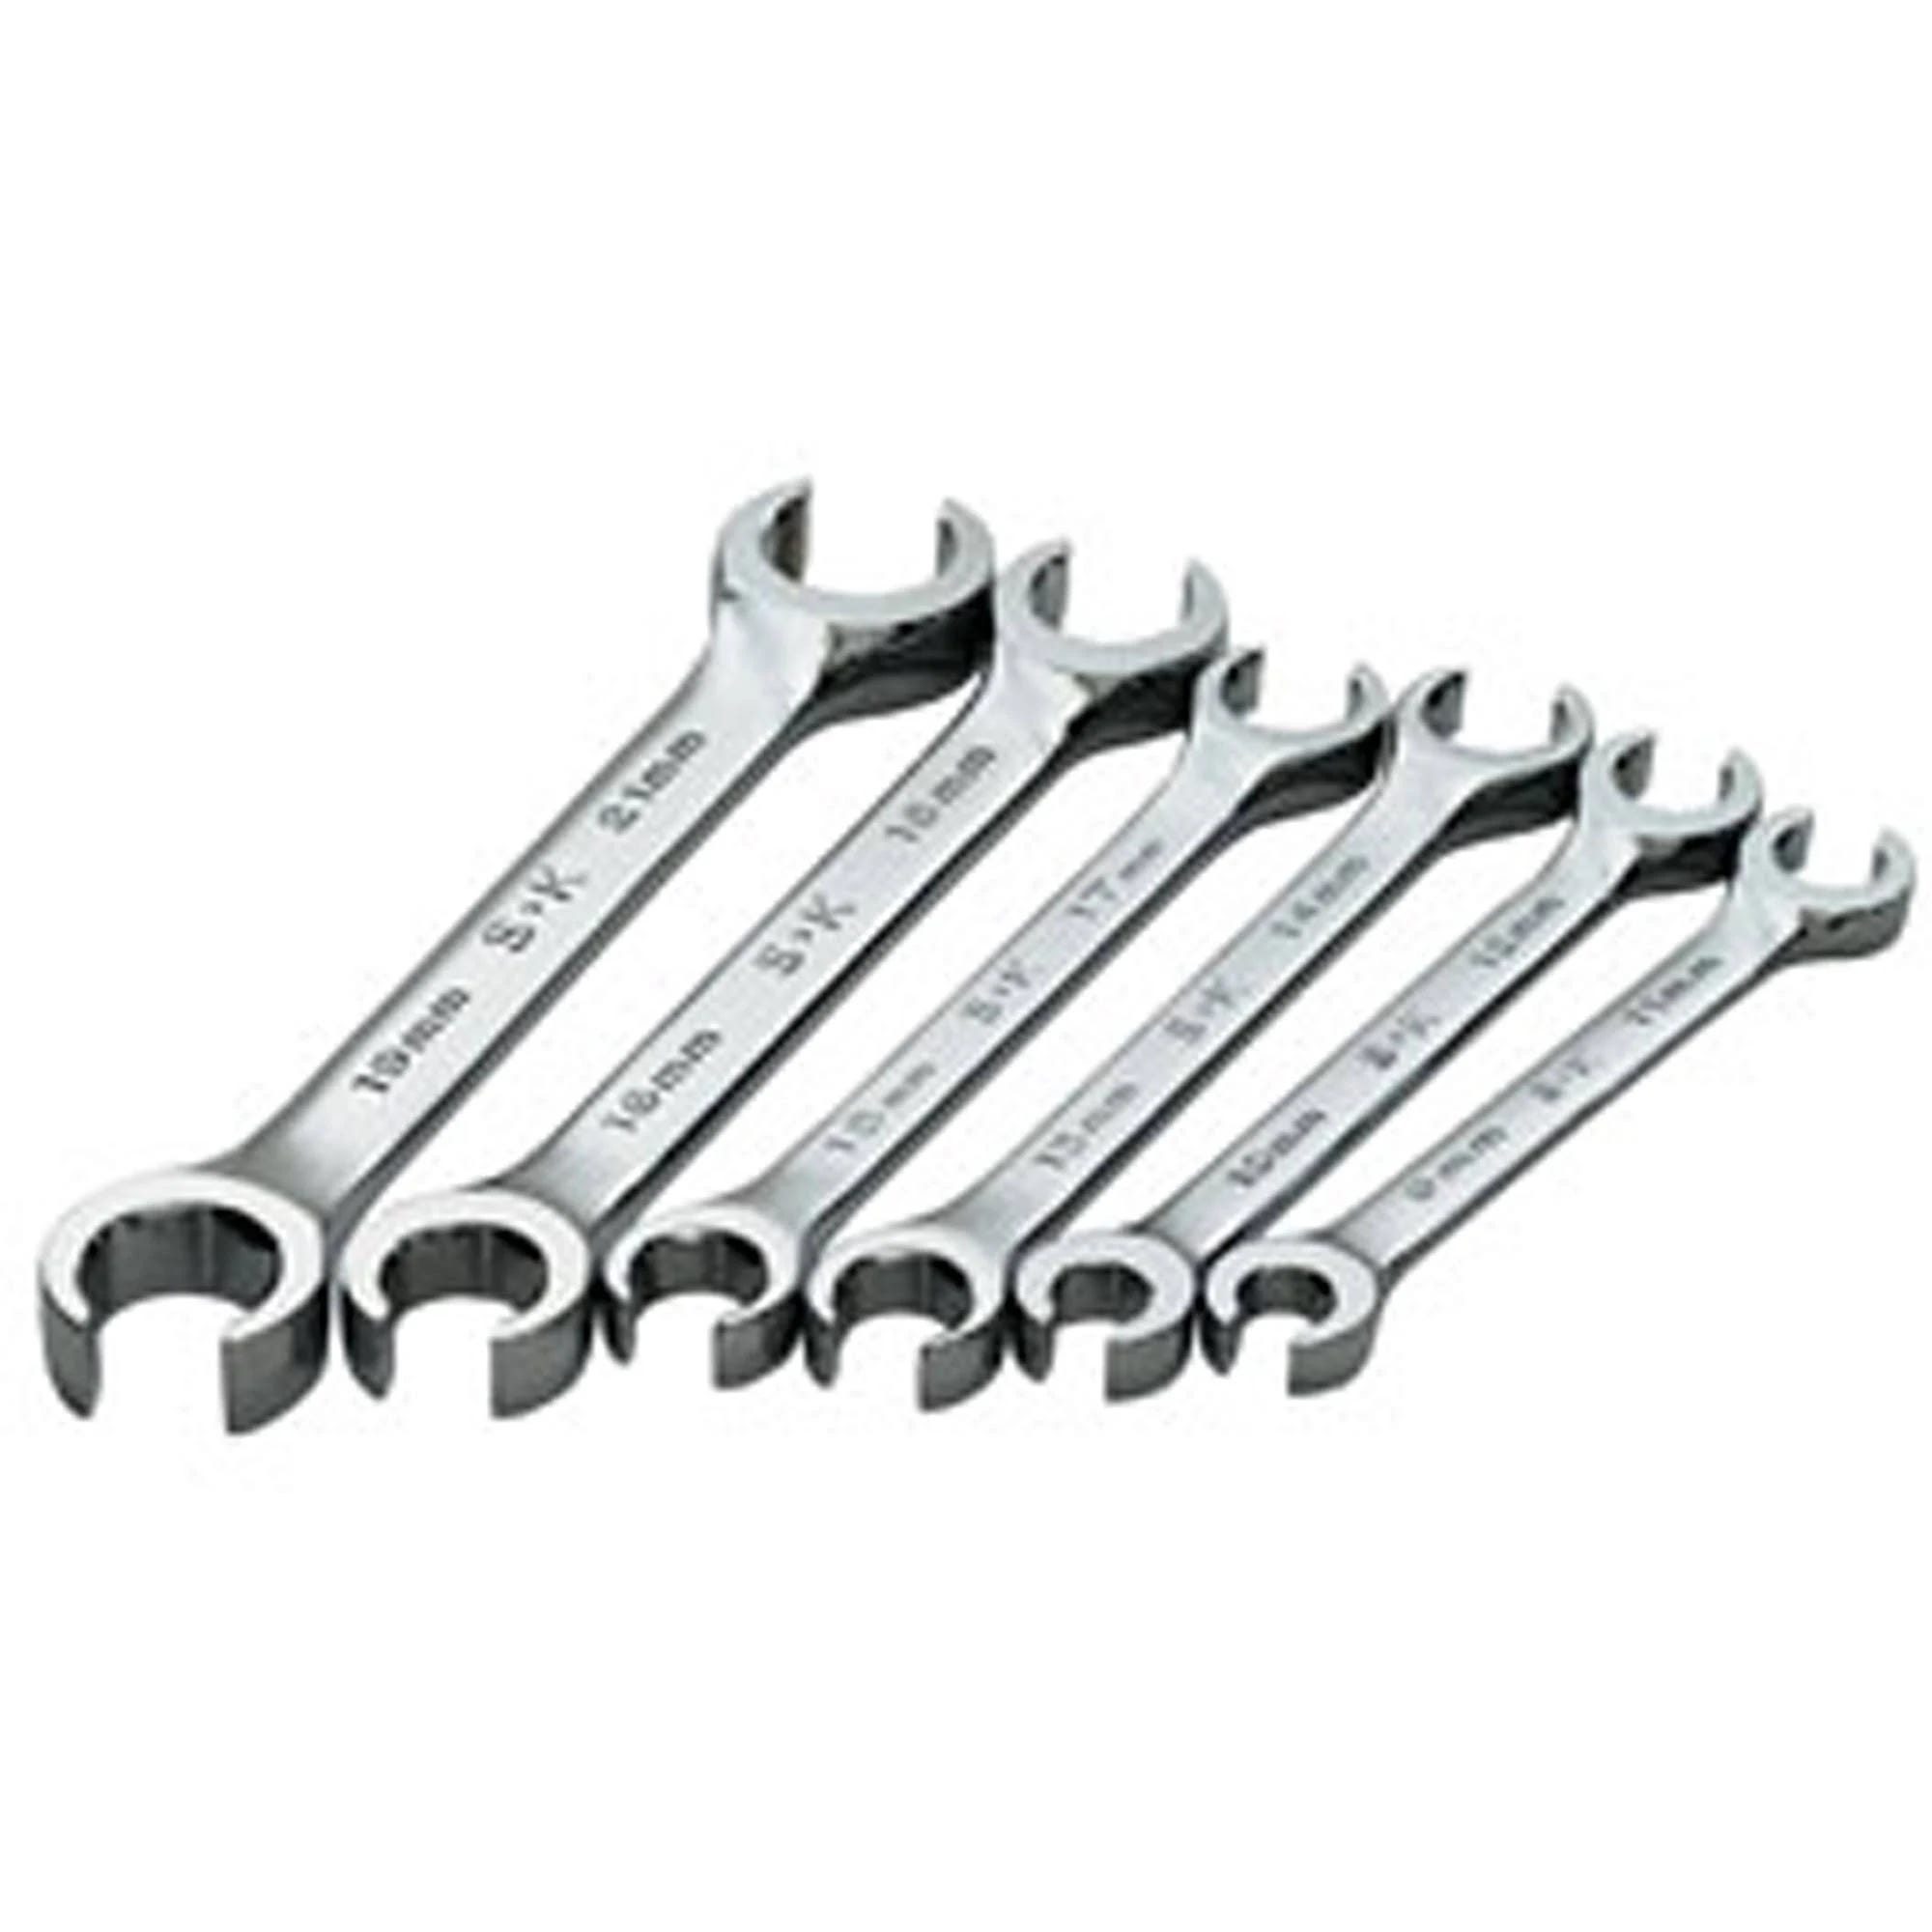 SK 376 6-Piece Flare Nut Wrench Set for Metric Fasteners | Image